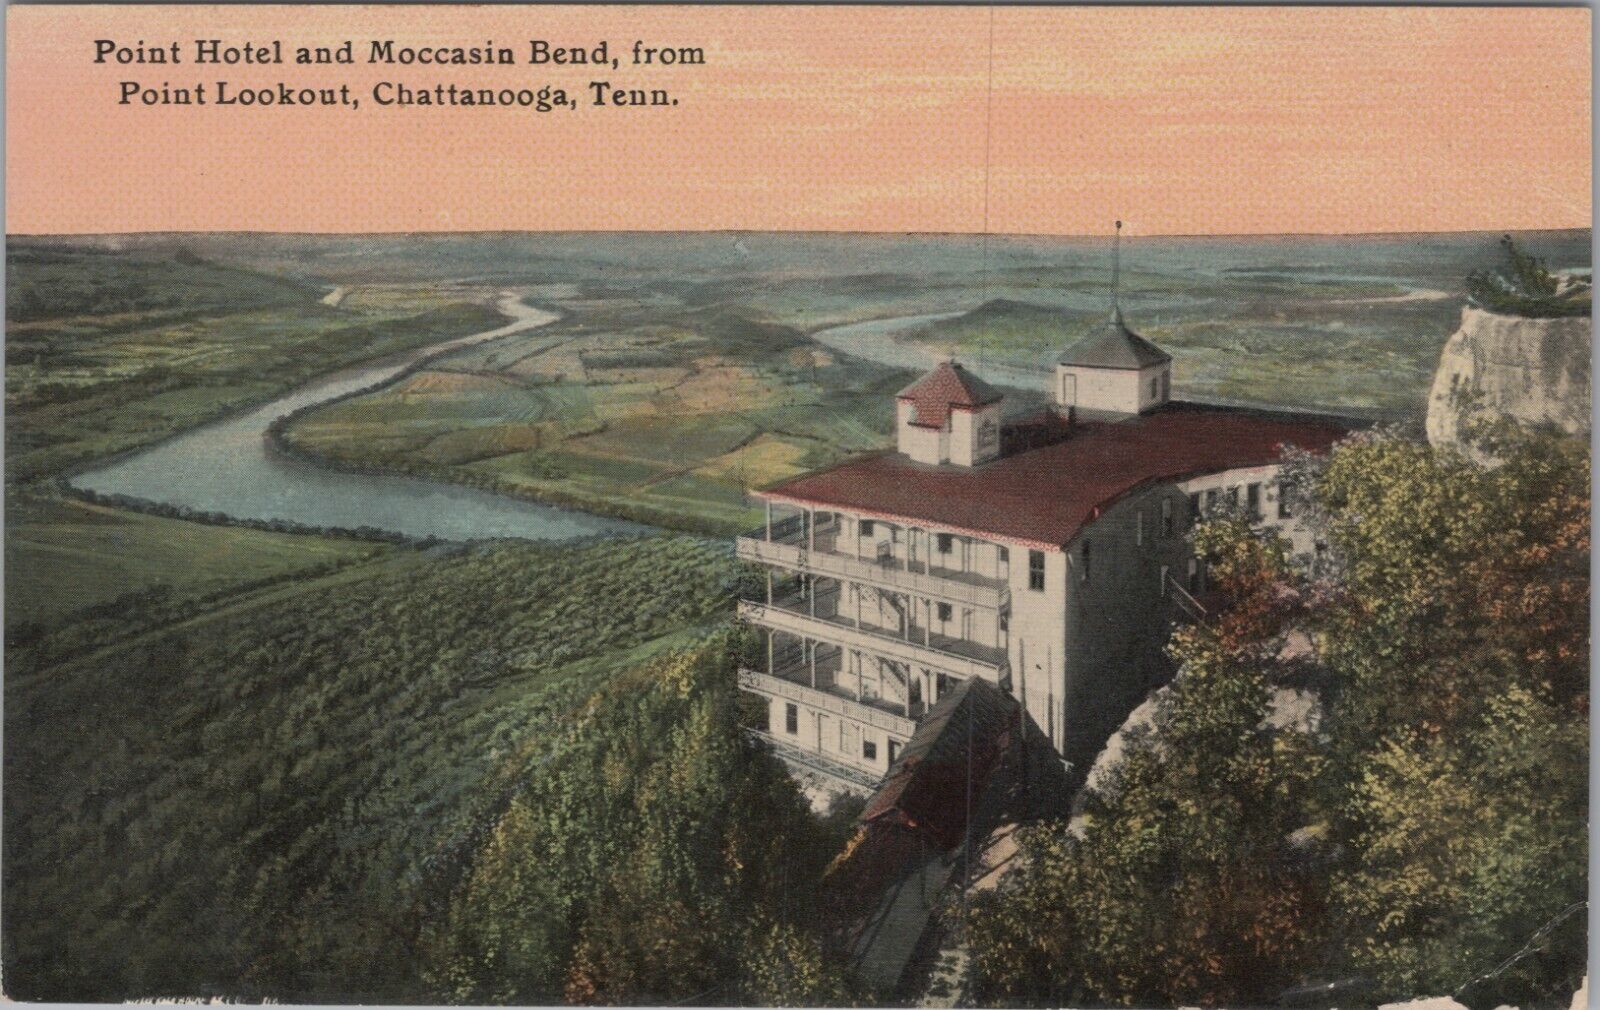 Point Hotel Lookout Mountain Chattanooga Tennessee TN c1910s Postcard 7300.5